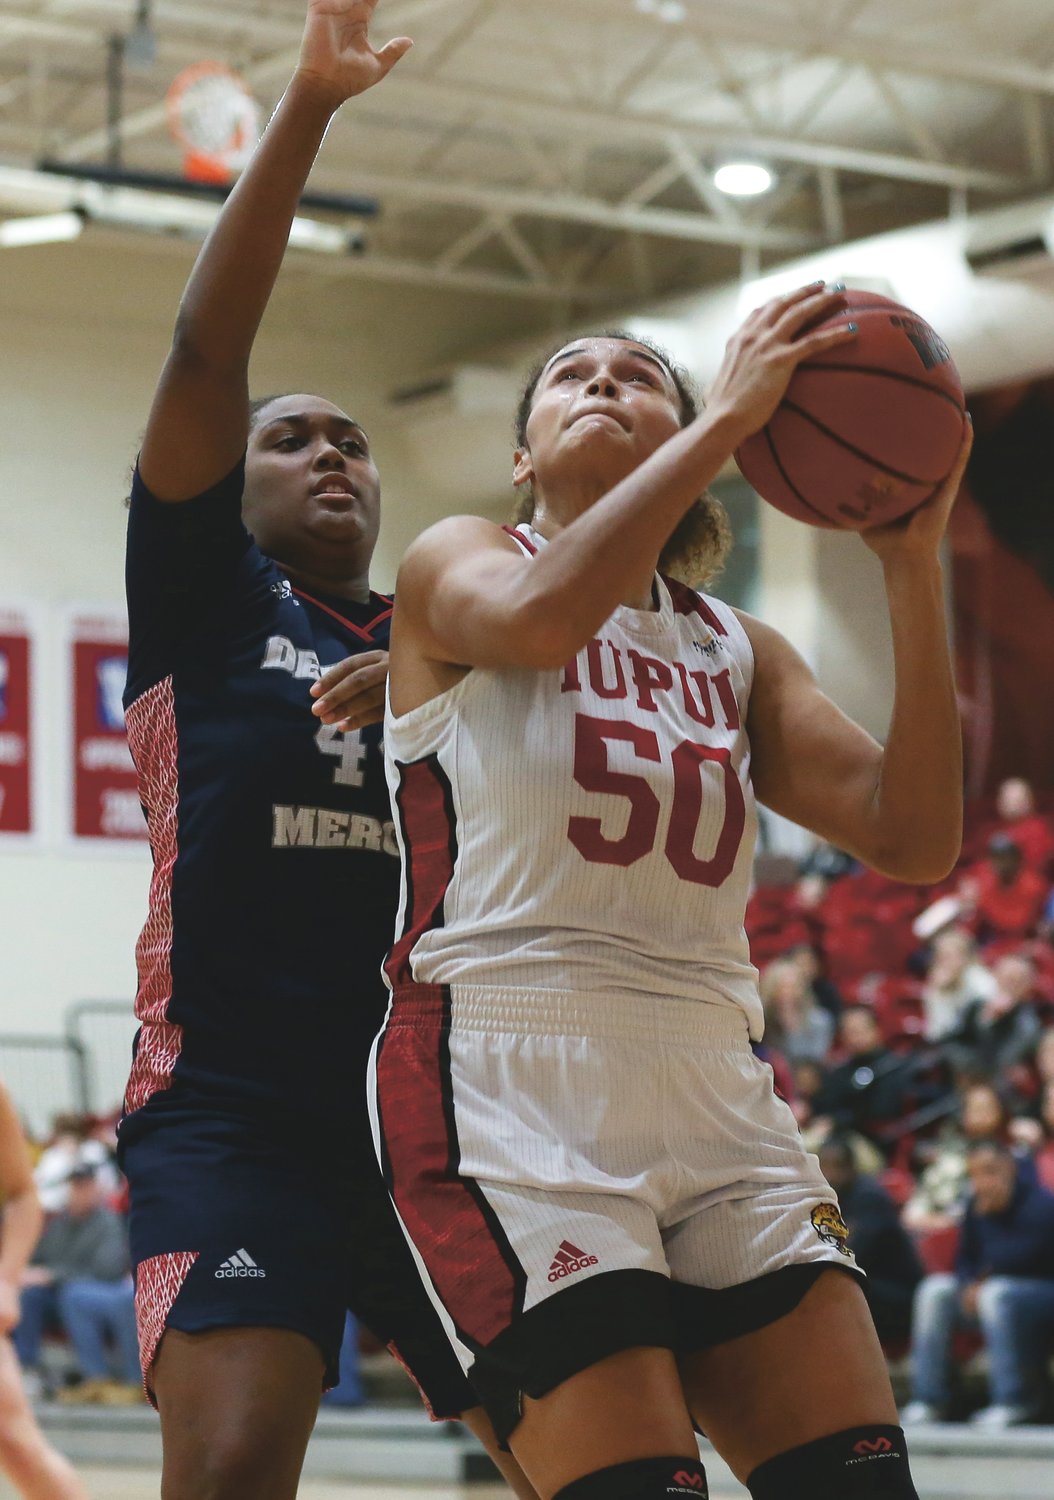 Macee Williams is averaging 16 points and 9 rebounds a game for IUPUI.